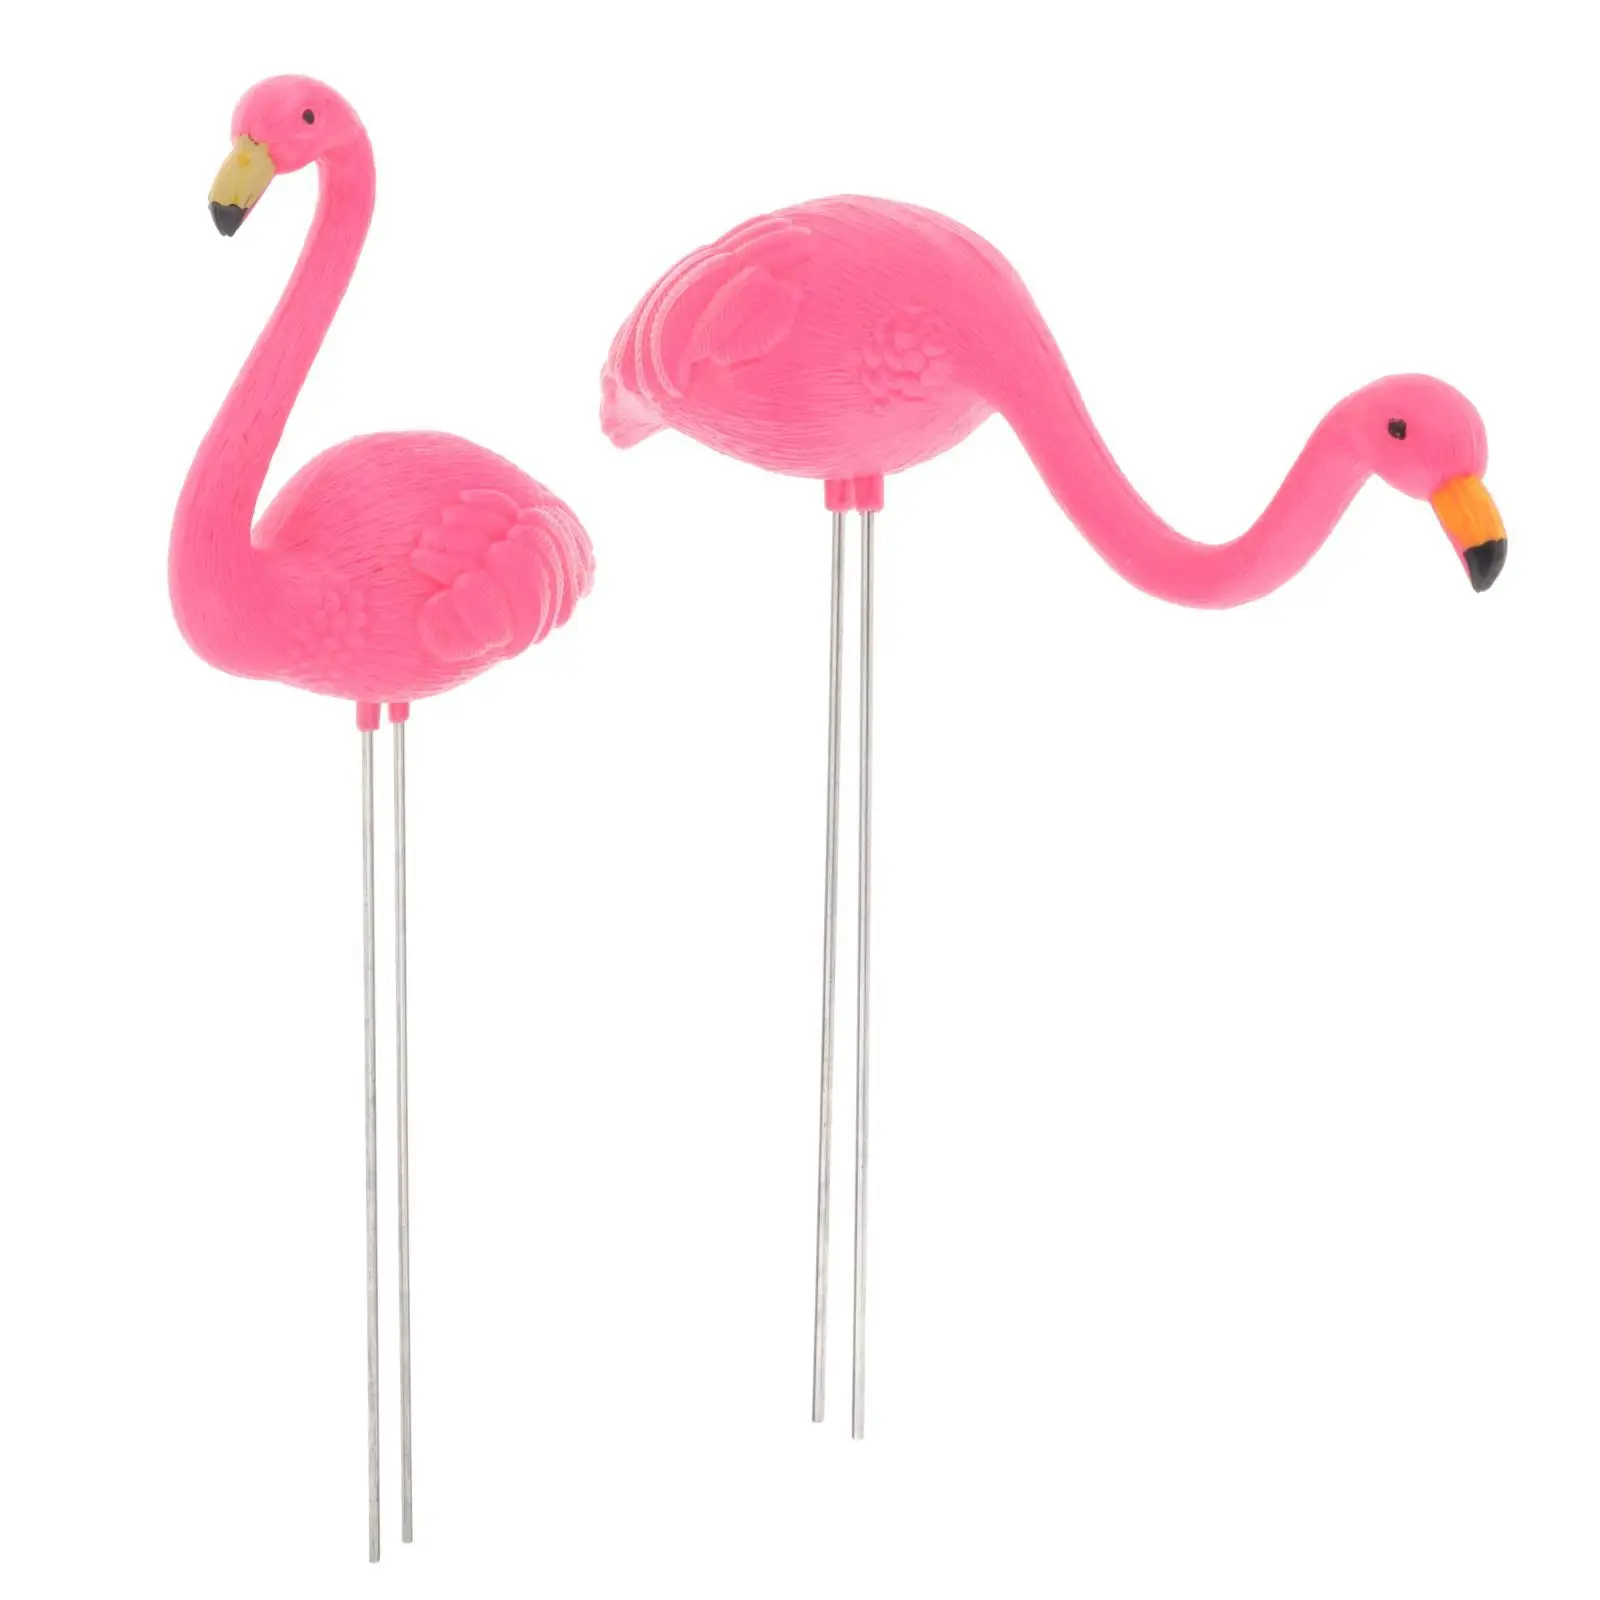 Flamingo Garden Stake Yard Ornament Statue Figurines Accessories for Home Cakes Topper